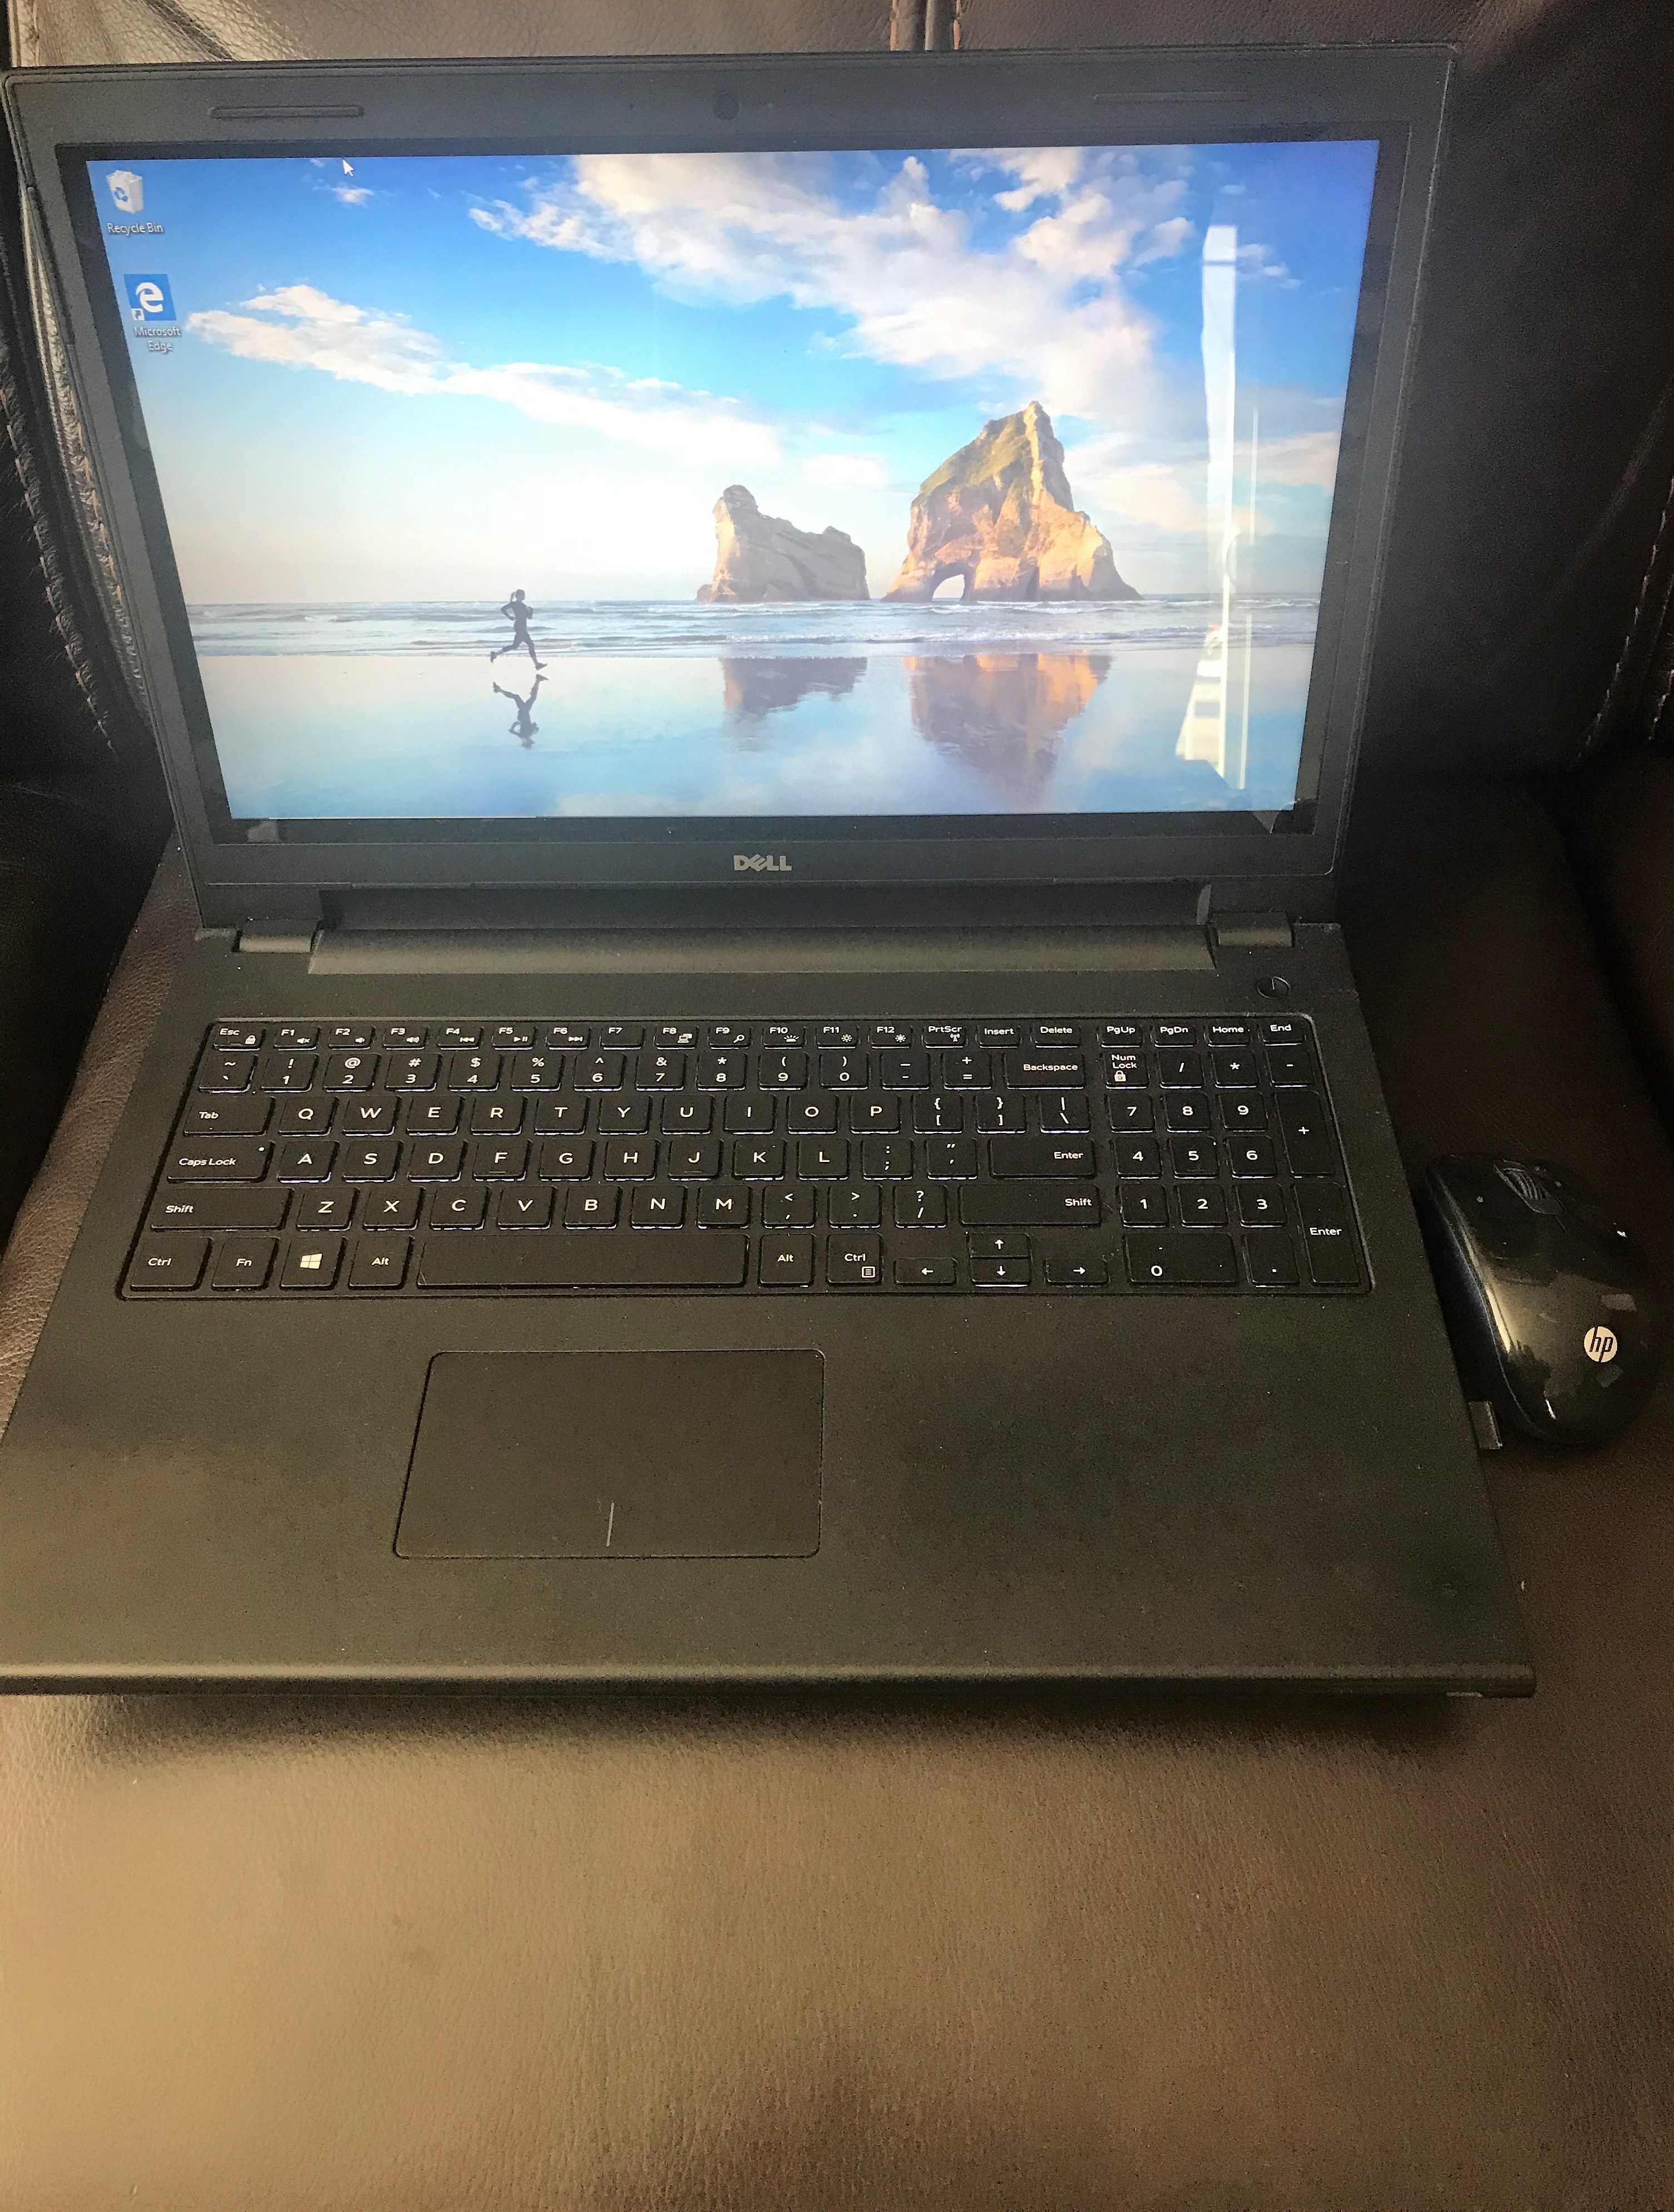 Dell Inspiron 3543 Touchscreen Laptop With i5 Processor And SSD Drive